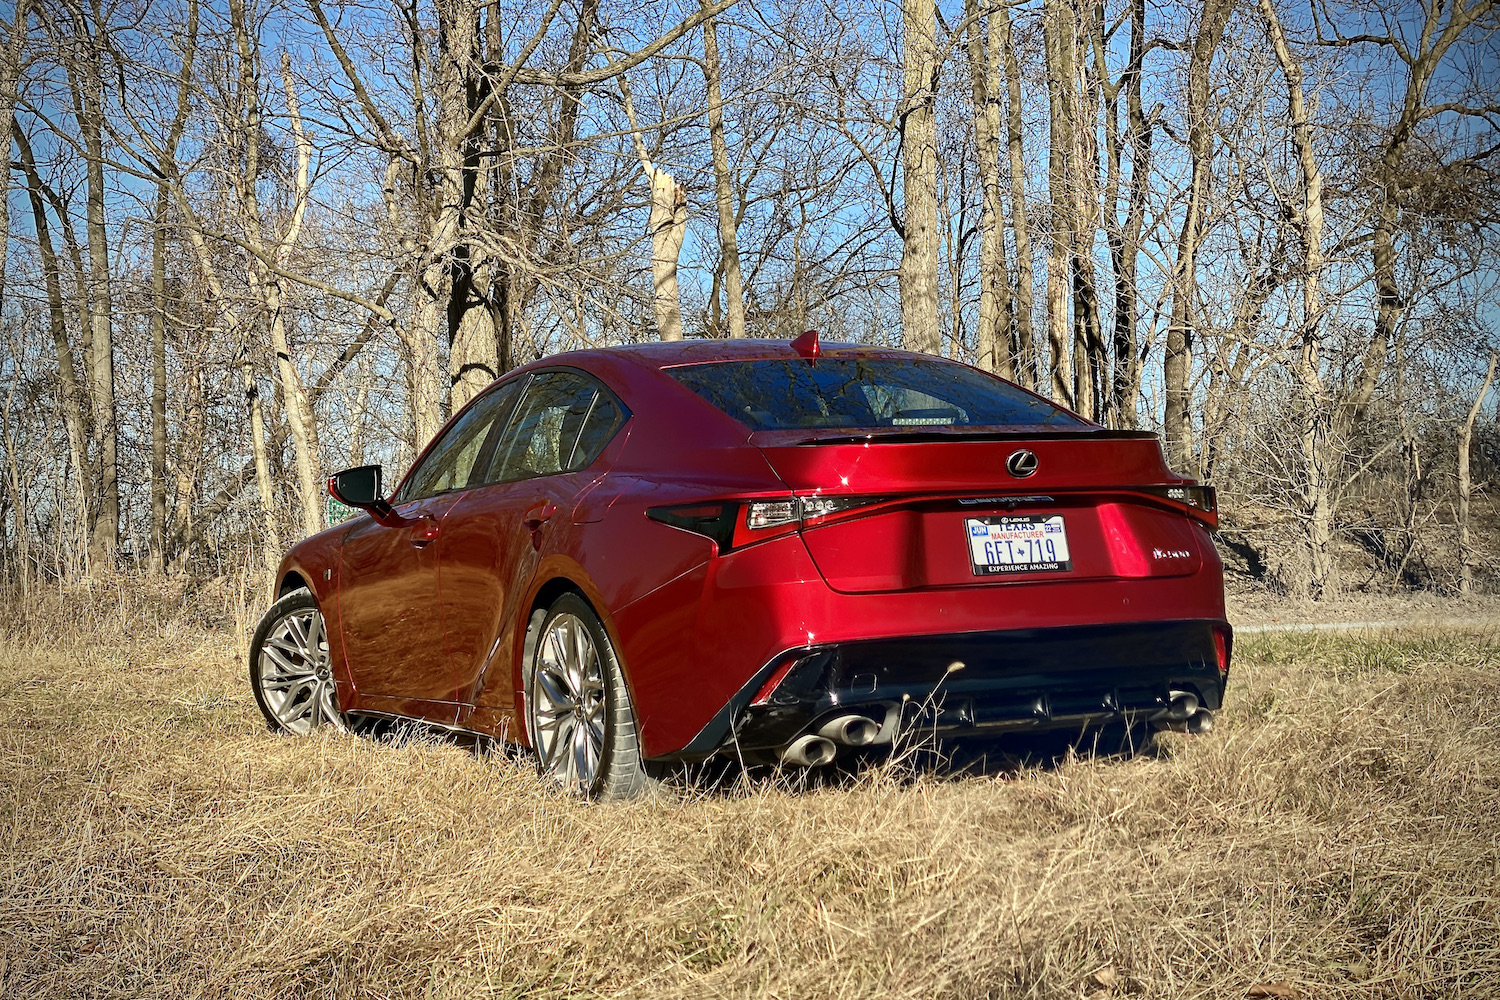 Lexus IS 500 rear end from driver's side angle in a grassy field.